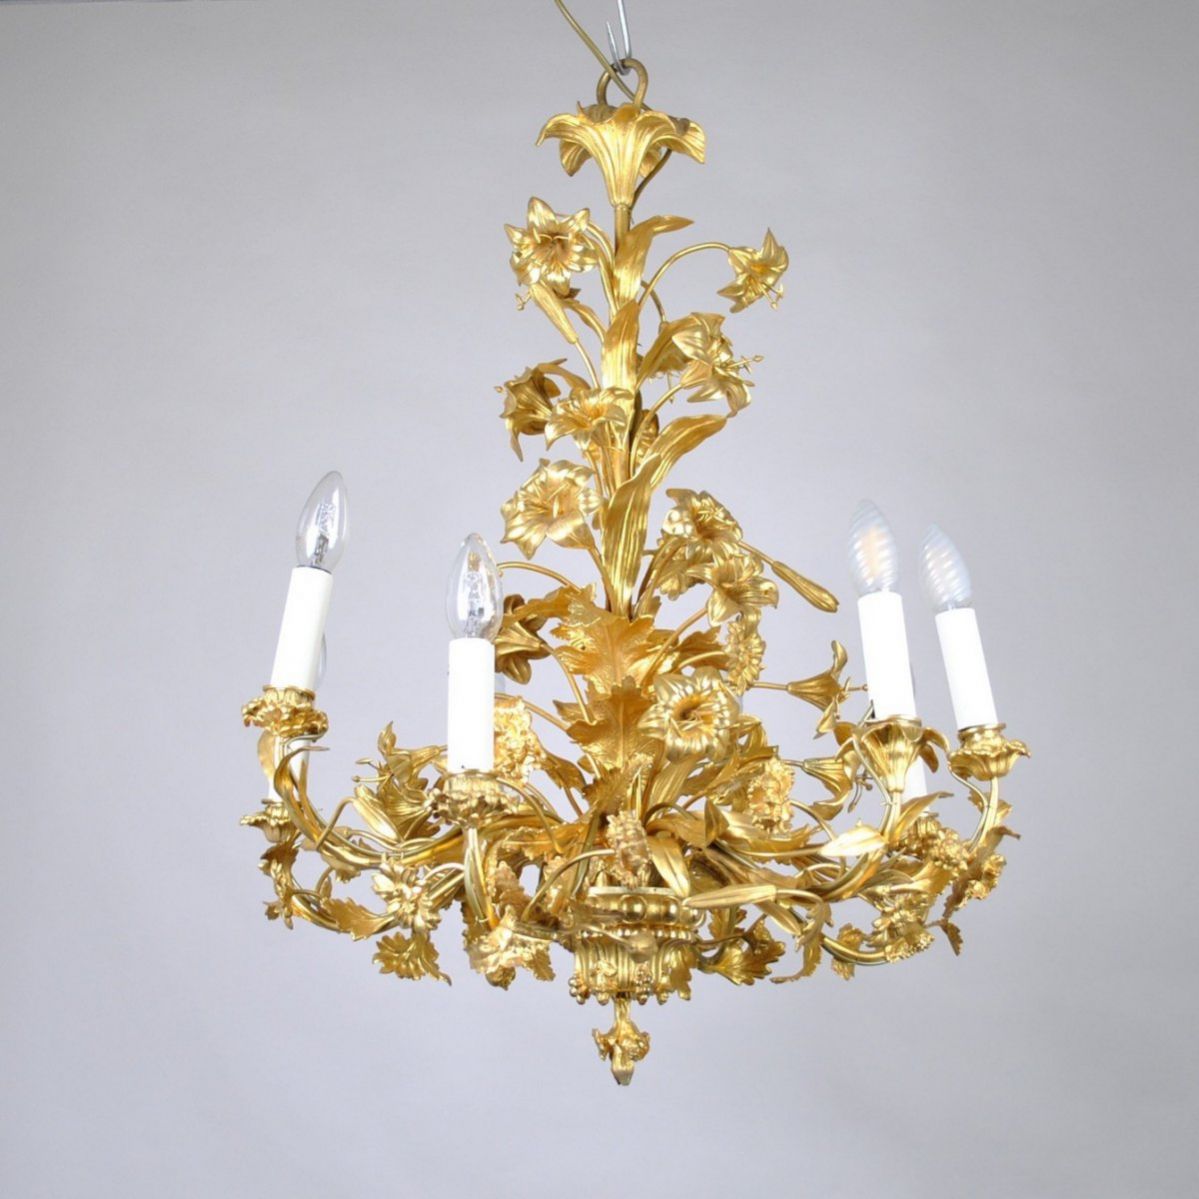 Gilt-bronze-chandelier-decorated-with-flowers-and-leaves-19th-century